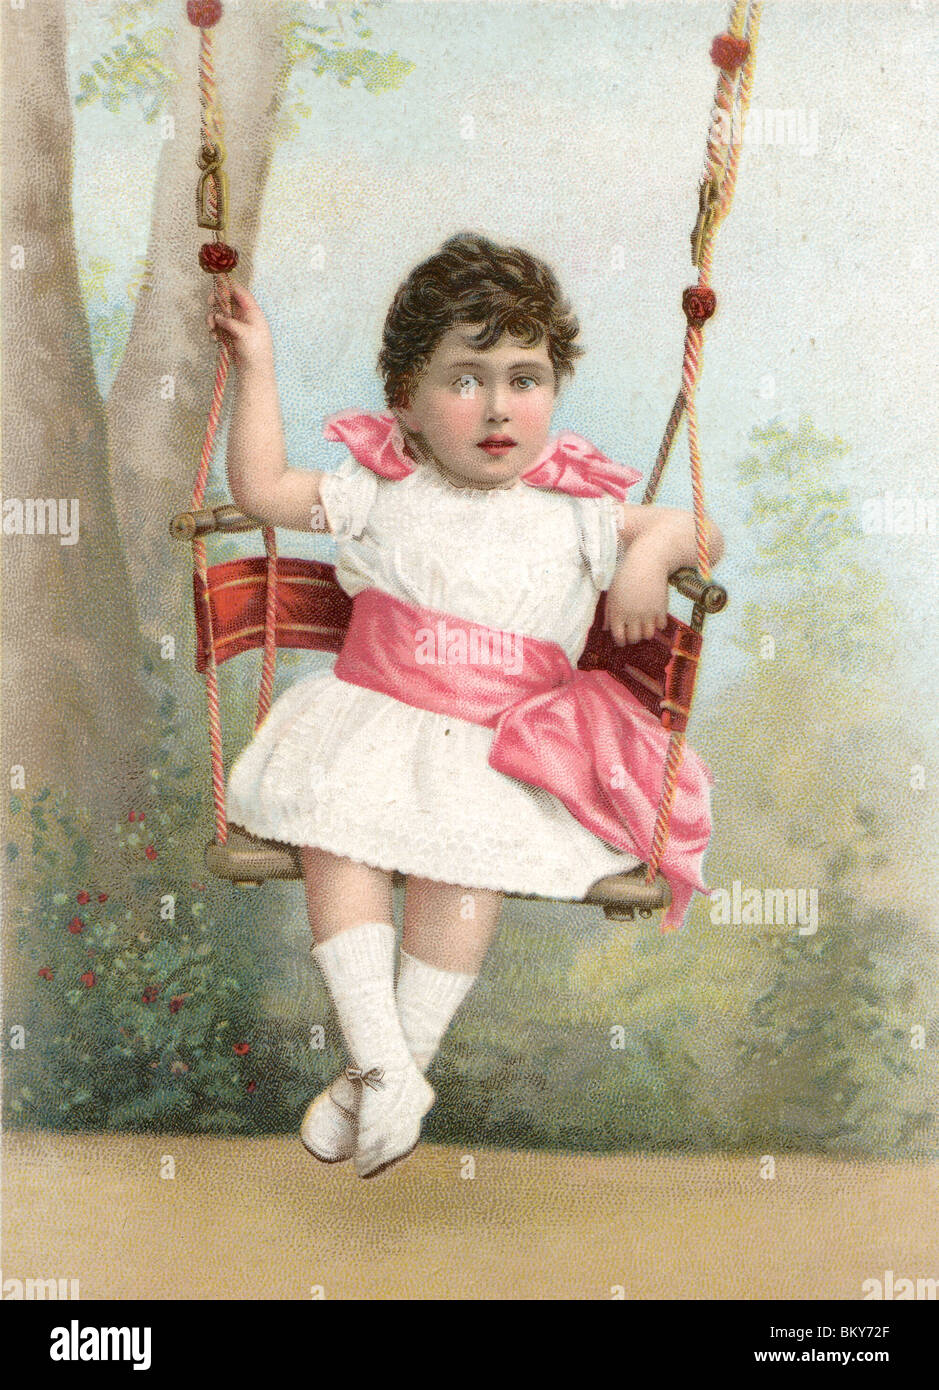 Young Girl on the Garden Swing Stock Photo